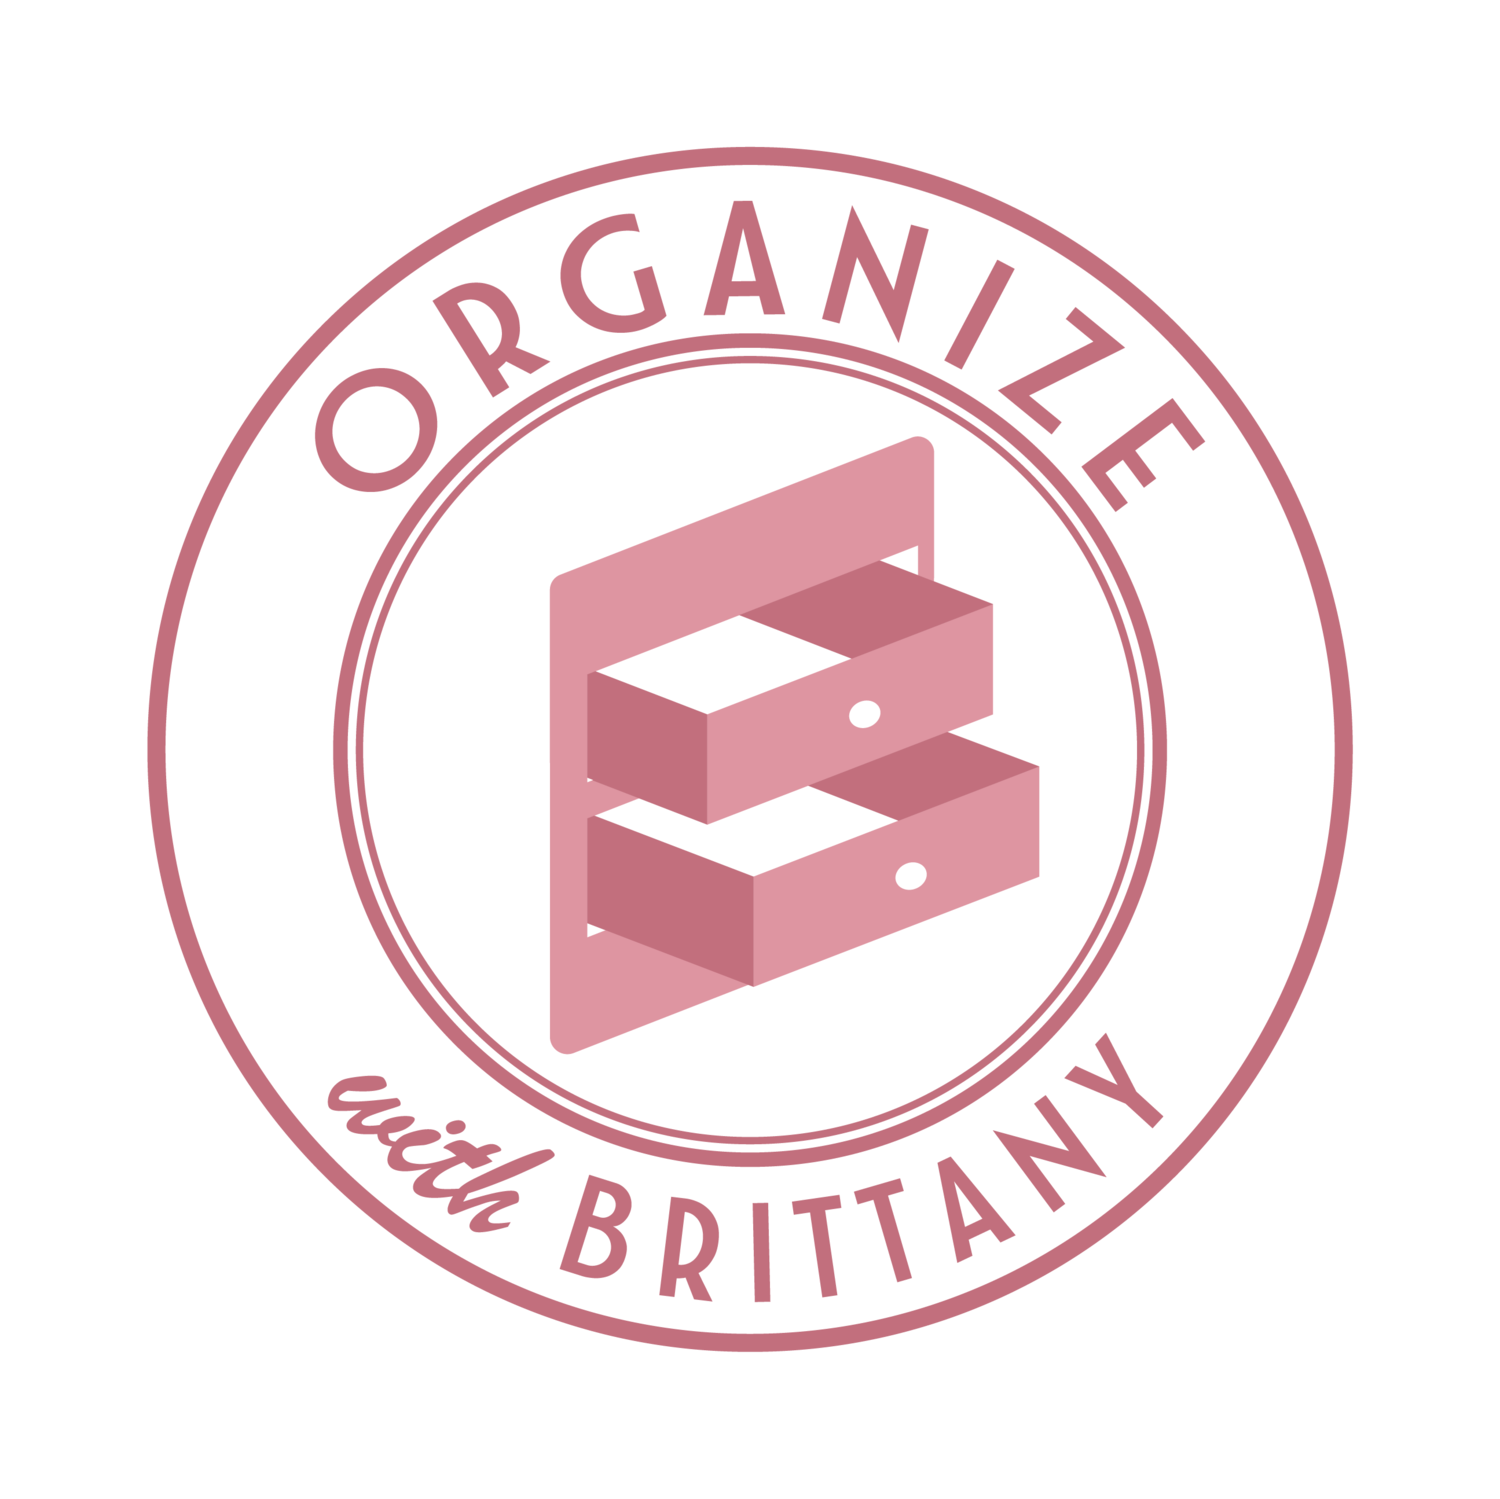 Organize with Brittany